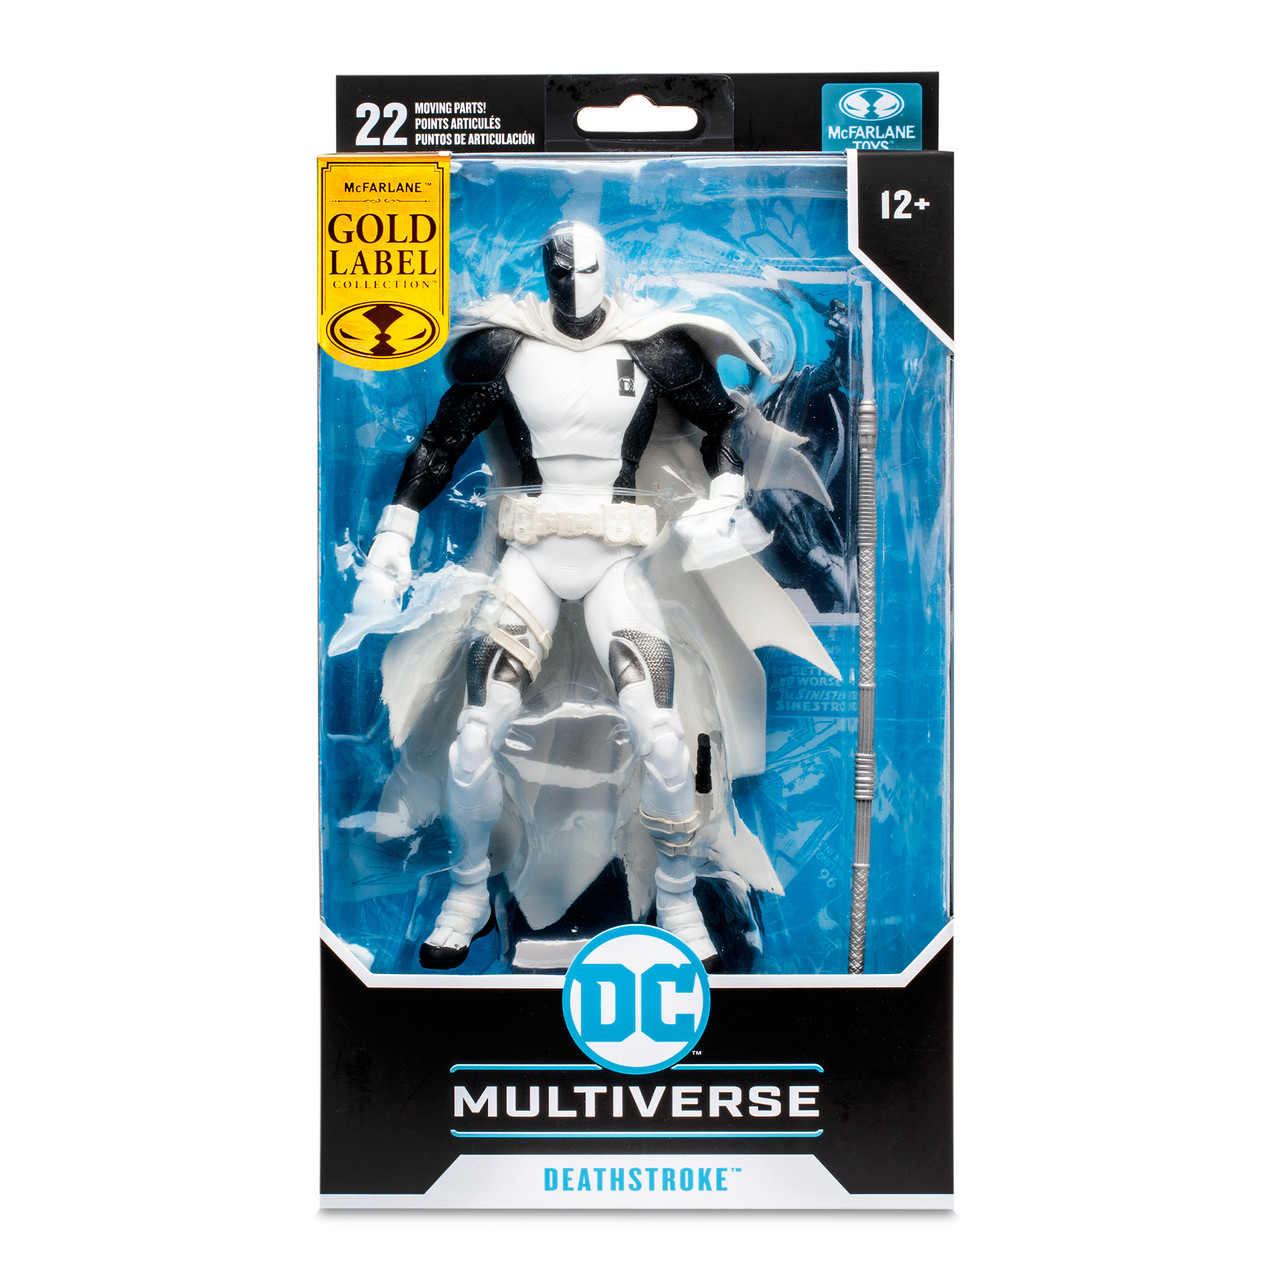 DC Multiverse End Cap Display Fall 2021 (24pc 7 Figures) Factory Sealed -  McFarlane Toys Store